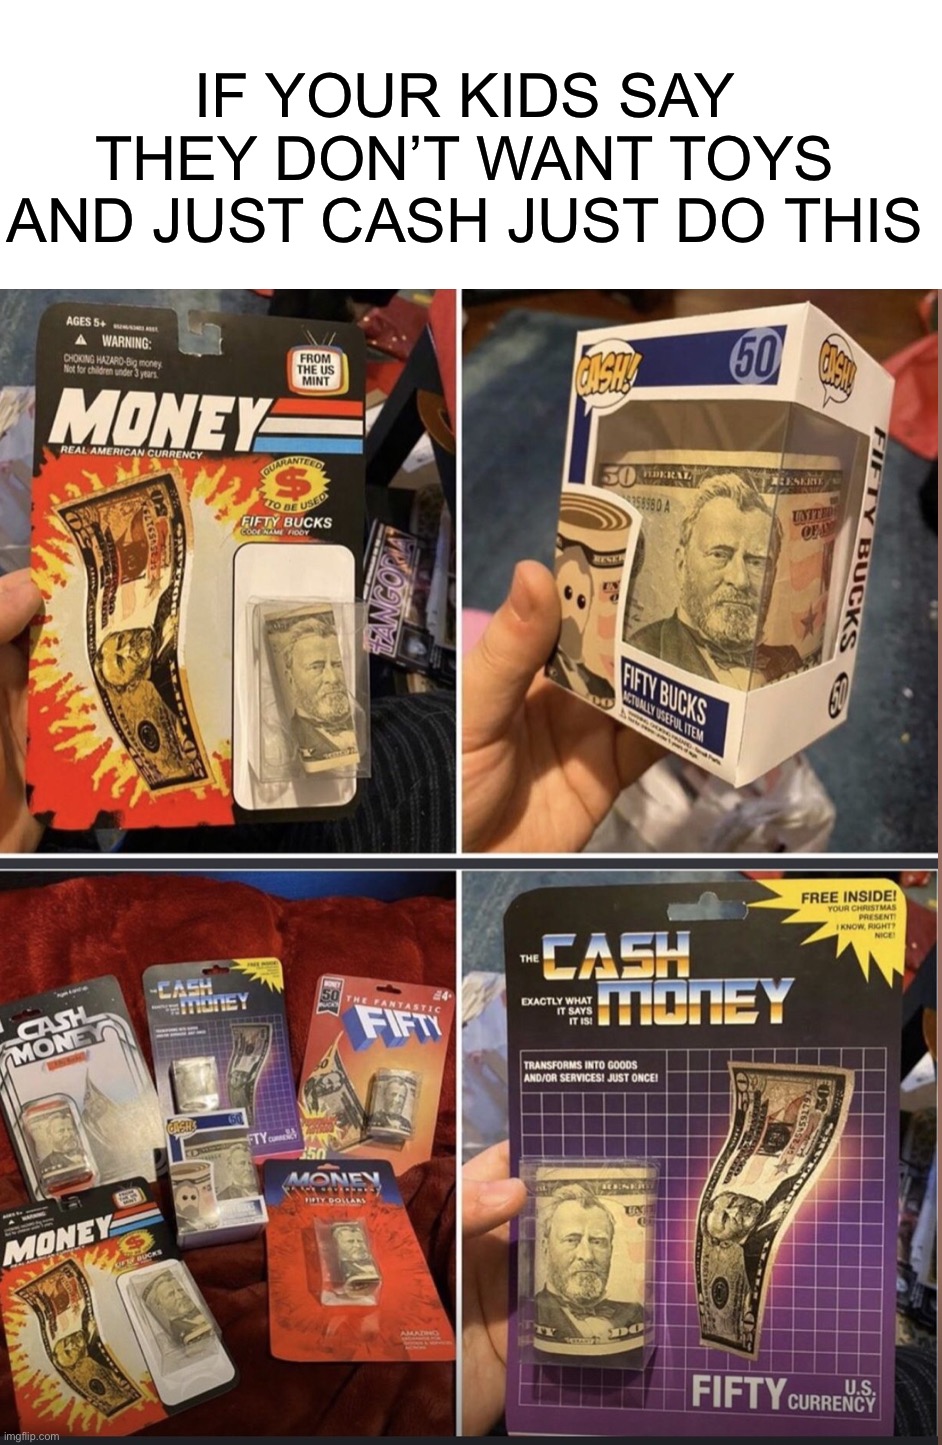 I’ll probably do this someday ngl | IF YOUR KIDS SAY THEY DON’T WANT TOYS AND JUST CASH JUST DO THIS | image tagged in memes,funny,cash,toys,money,kids | made w/ Imgflip meme maker